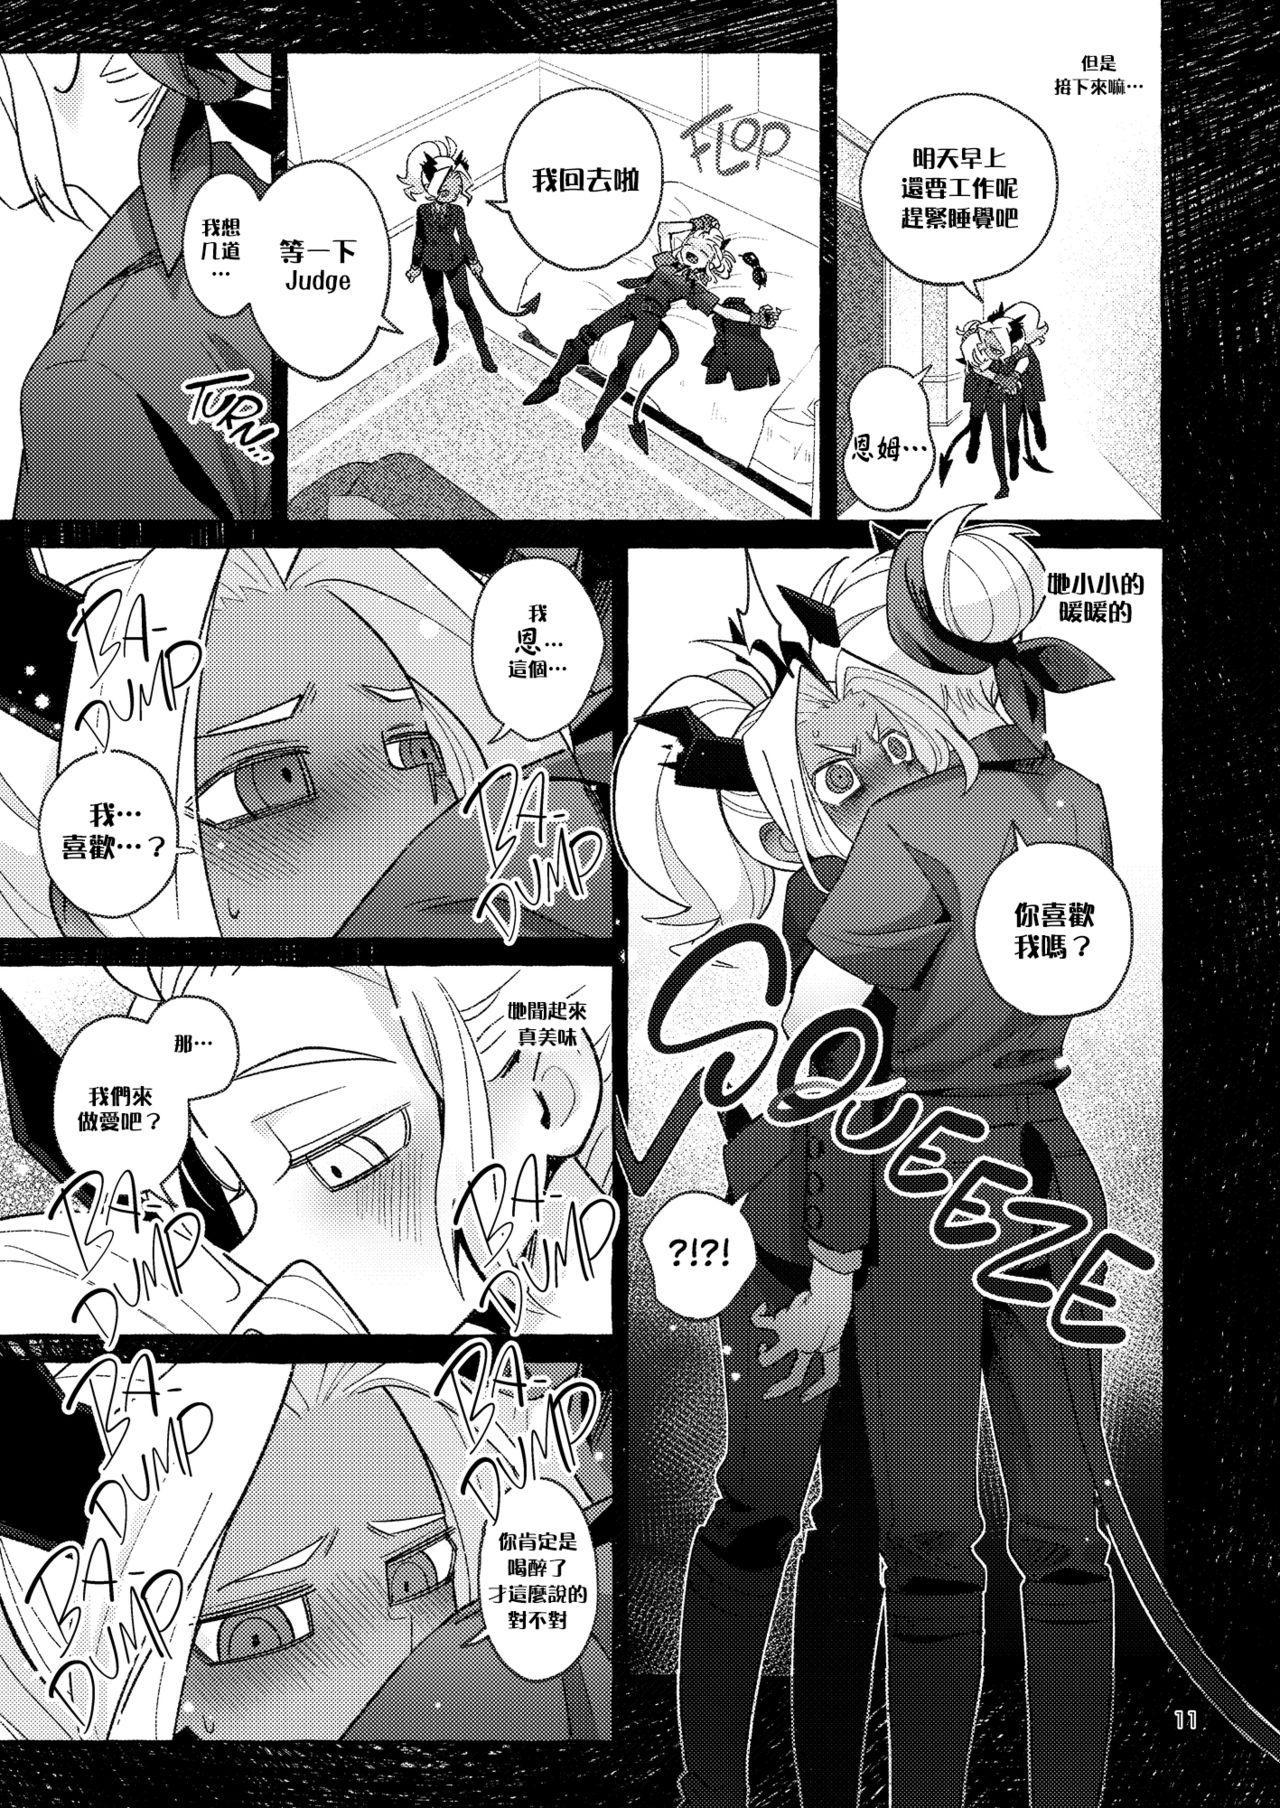 Curves tint+℃ - Helltaker Gay Reality - Page 11